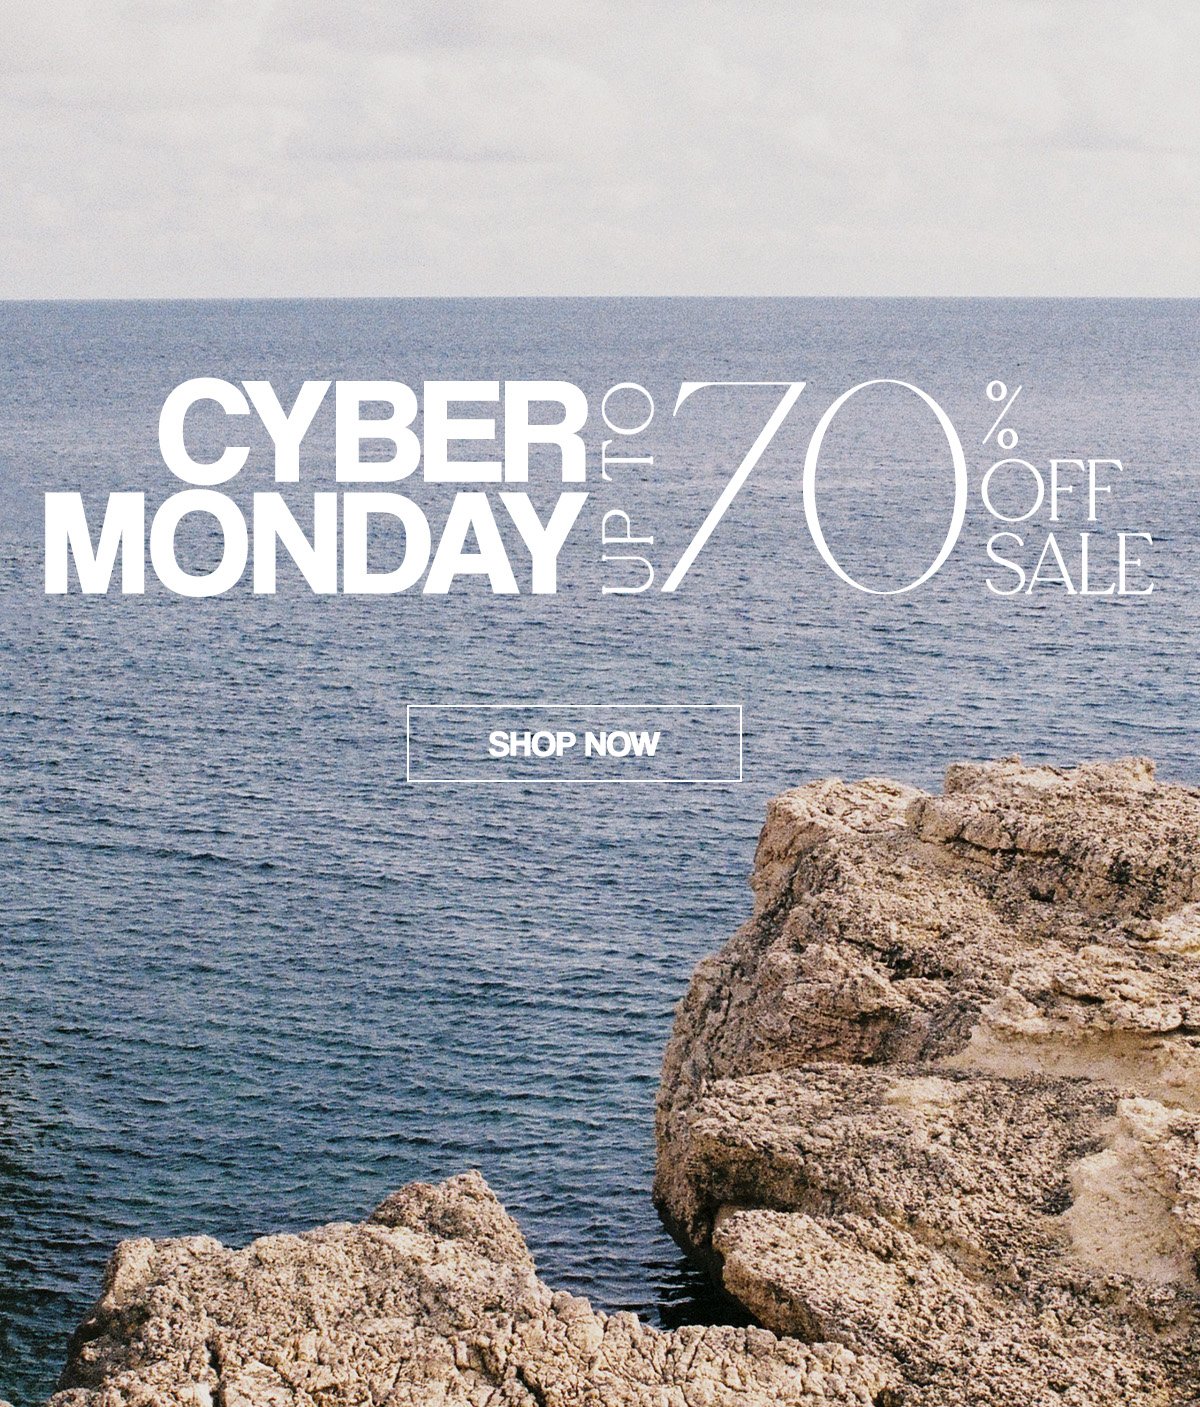 CYBER MONDAY. UP TO 70% OFF SALE.